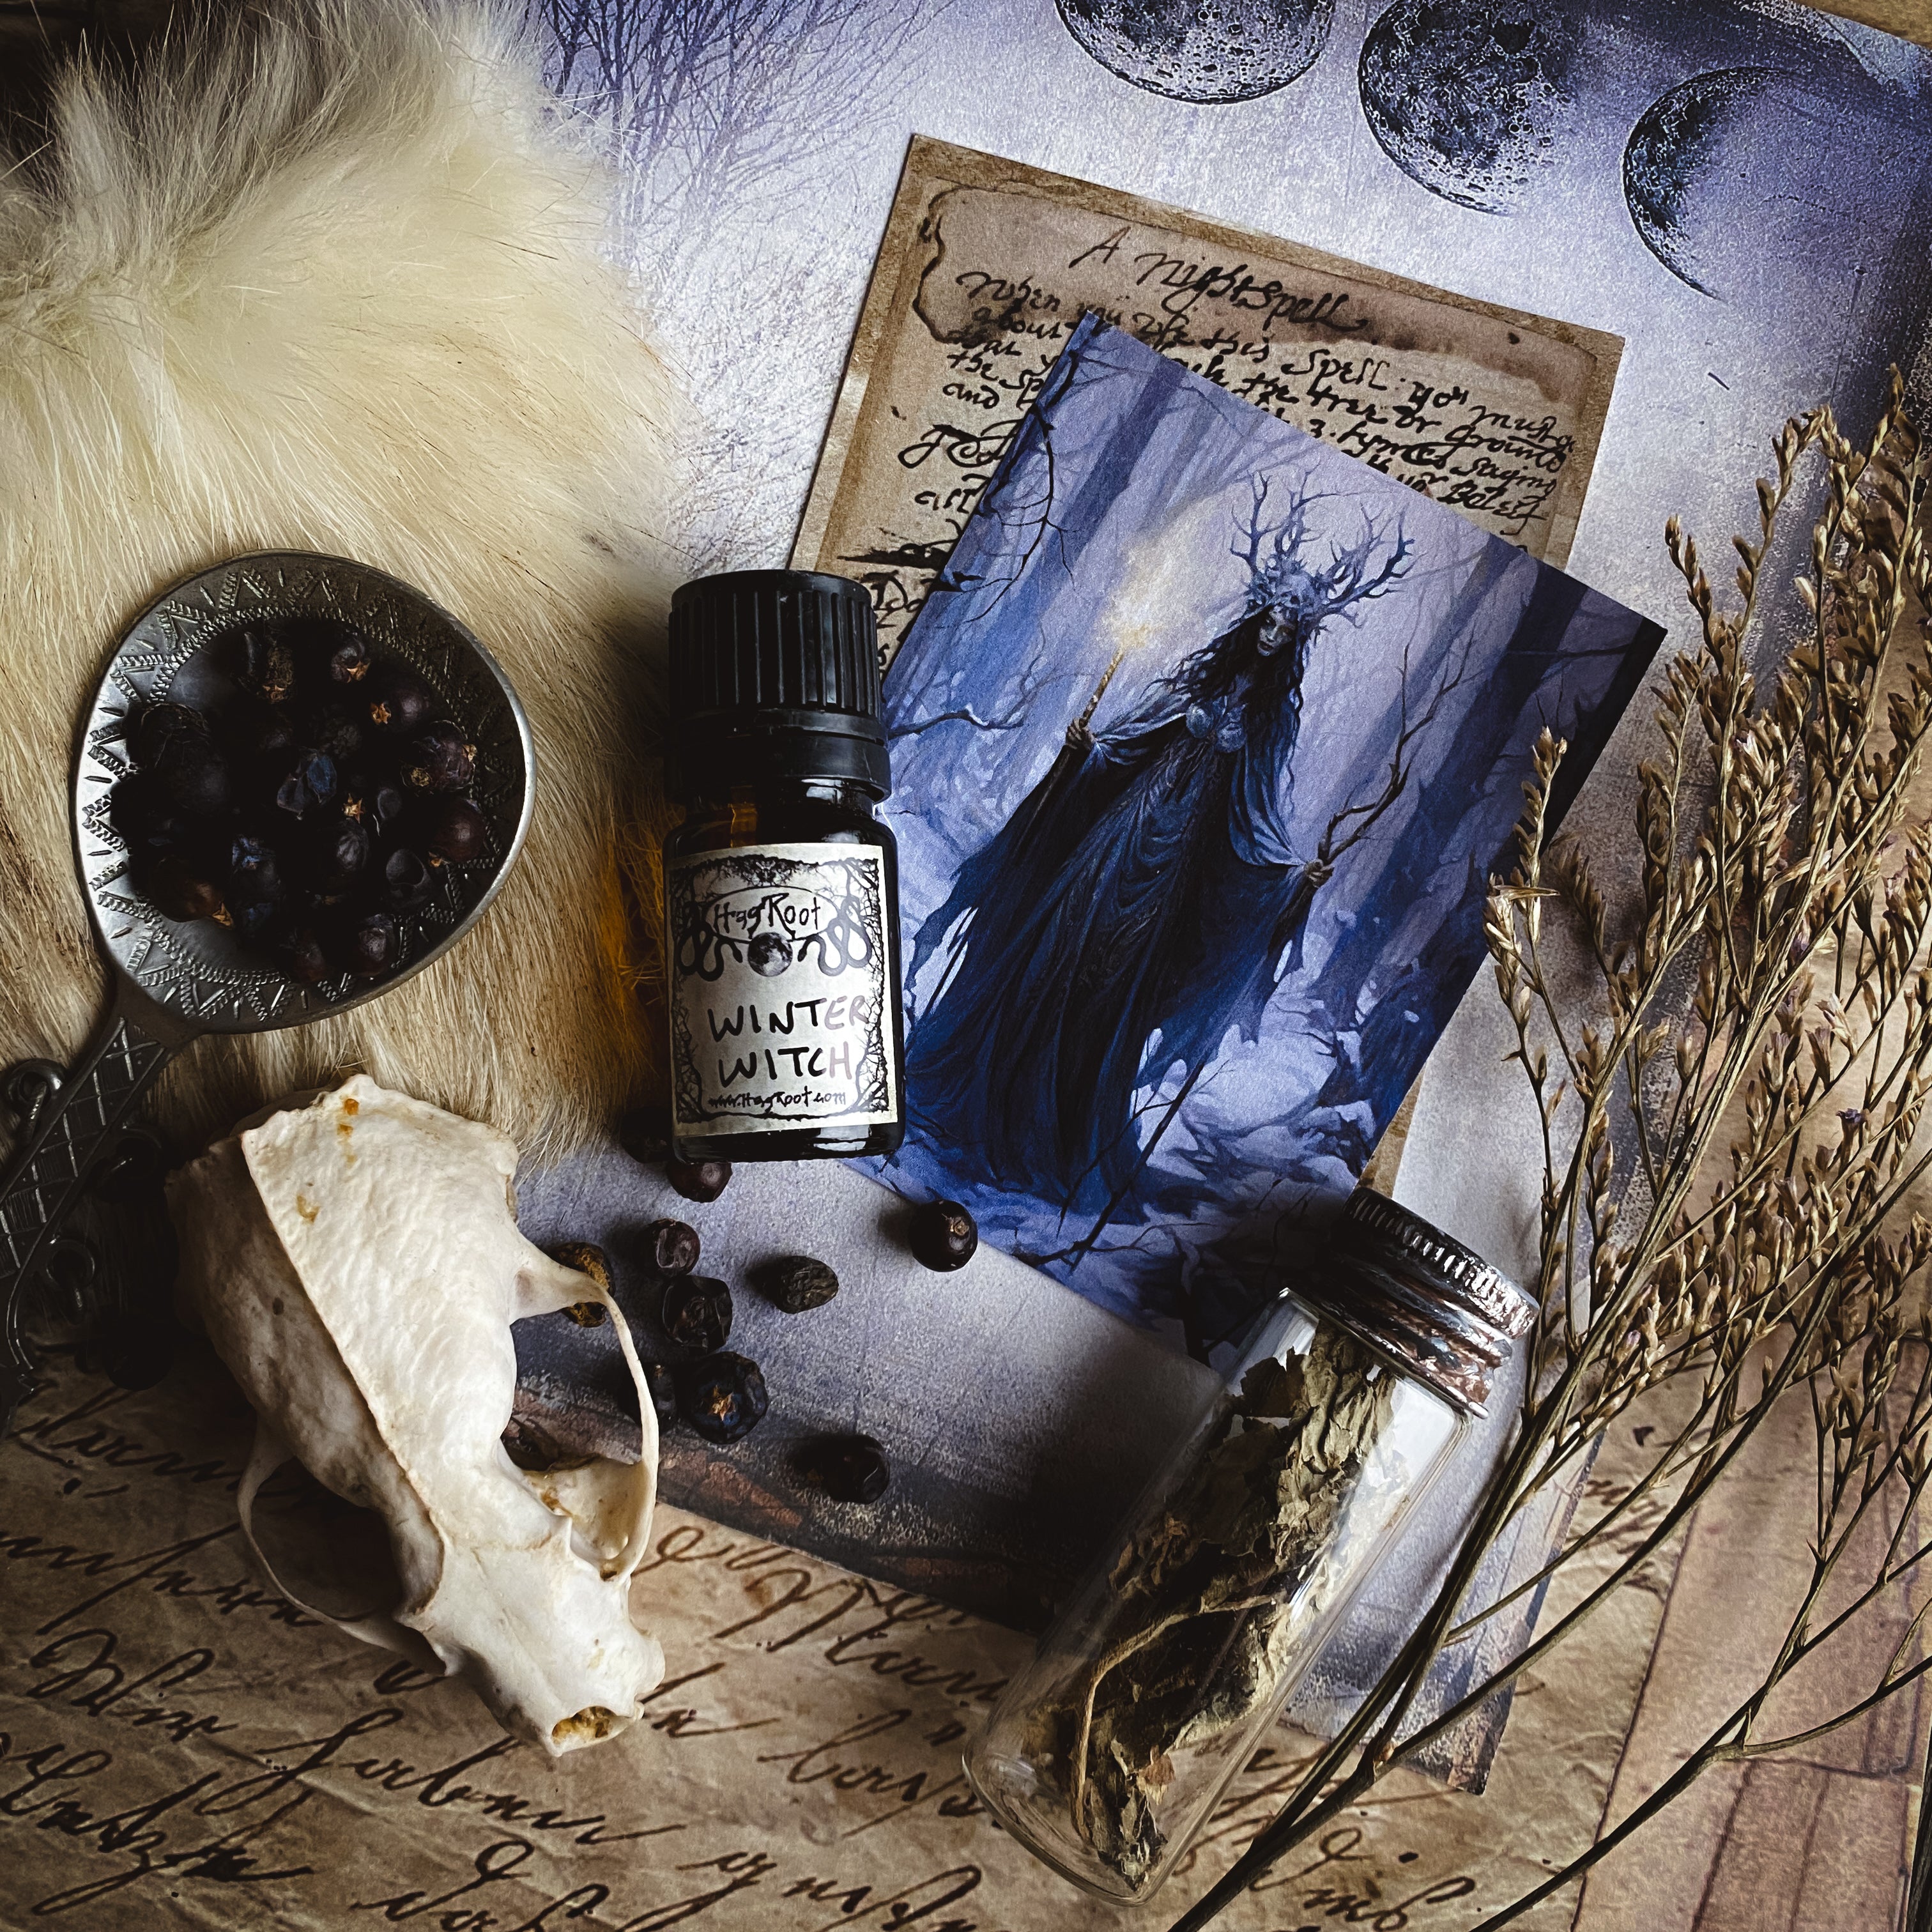 WINTER WITCH-(Peppermint, Cedar, Pine, Roasted Marshmallows)-Perfume, Cologne, Anointing, Ritual Oil